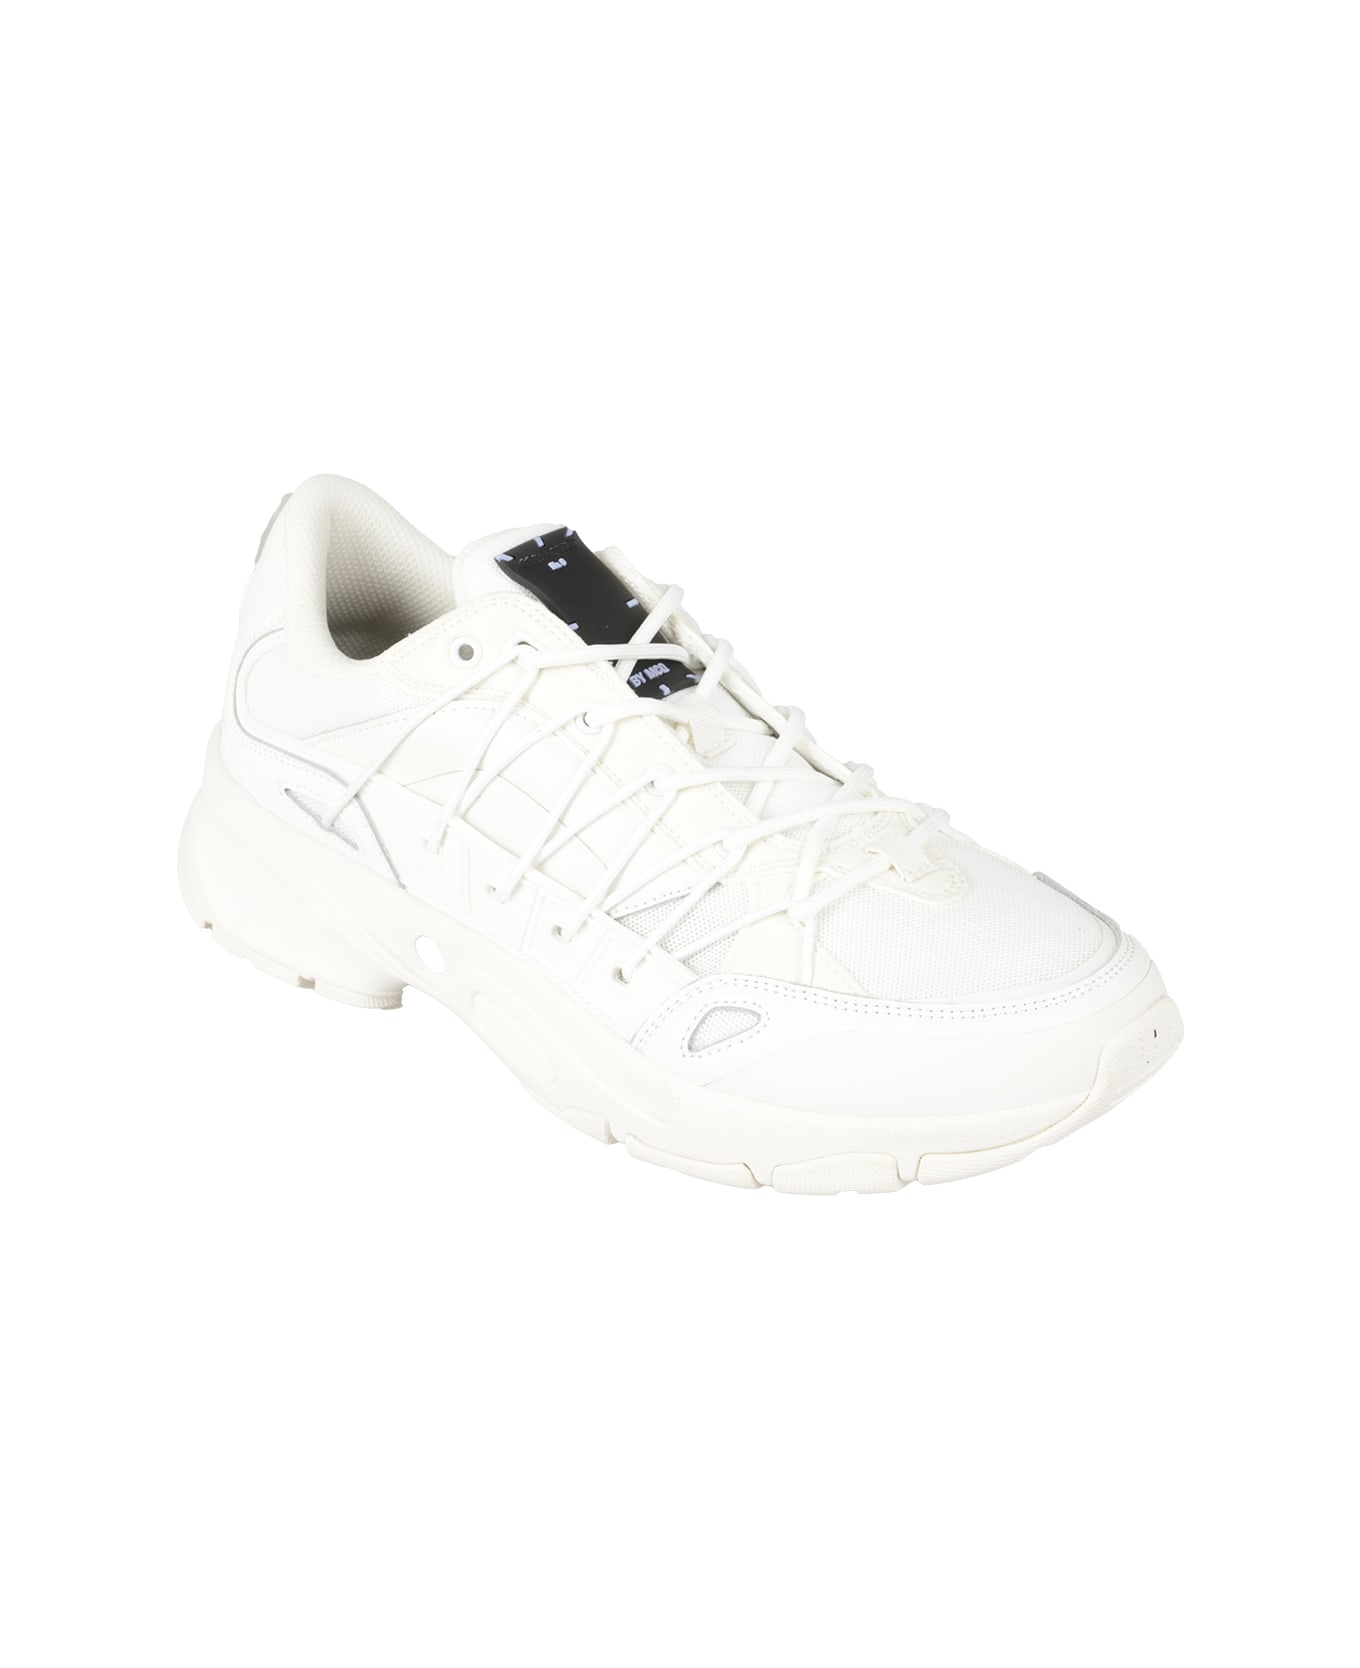 McQ Alexander McQueen Sneakers Shoes - White